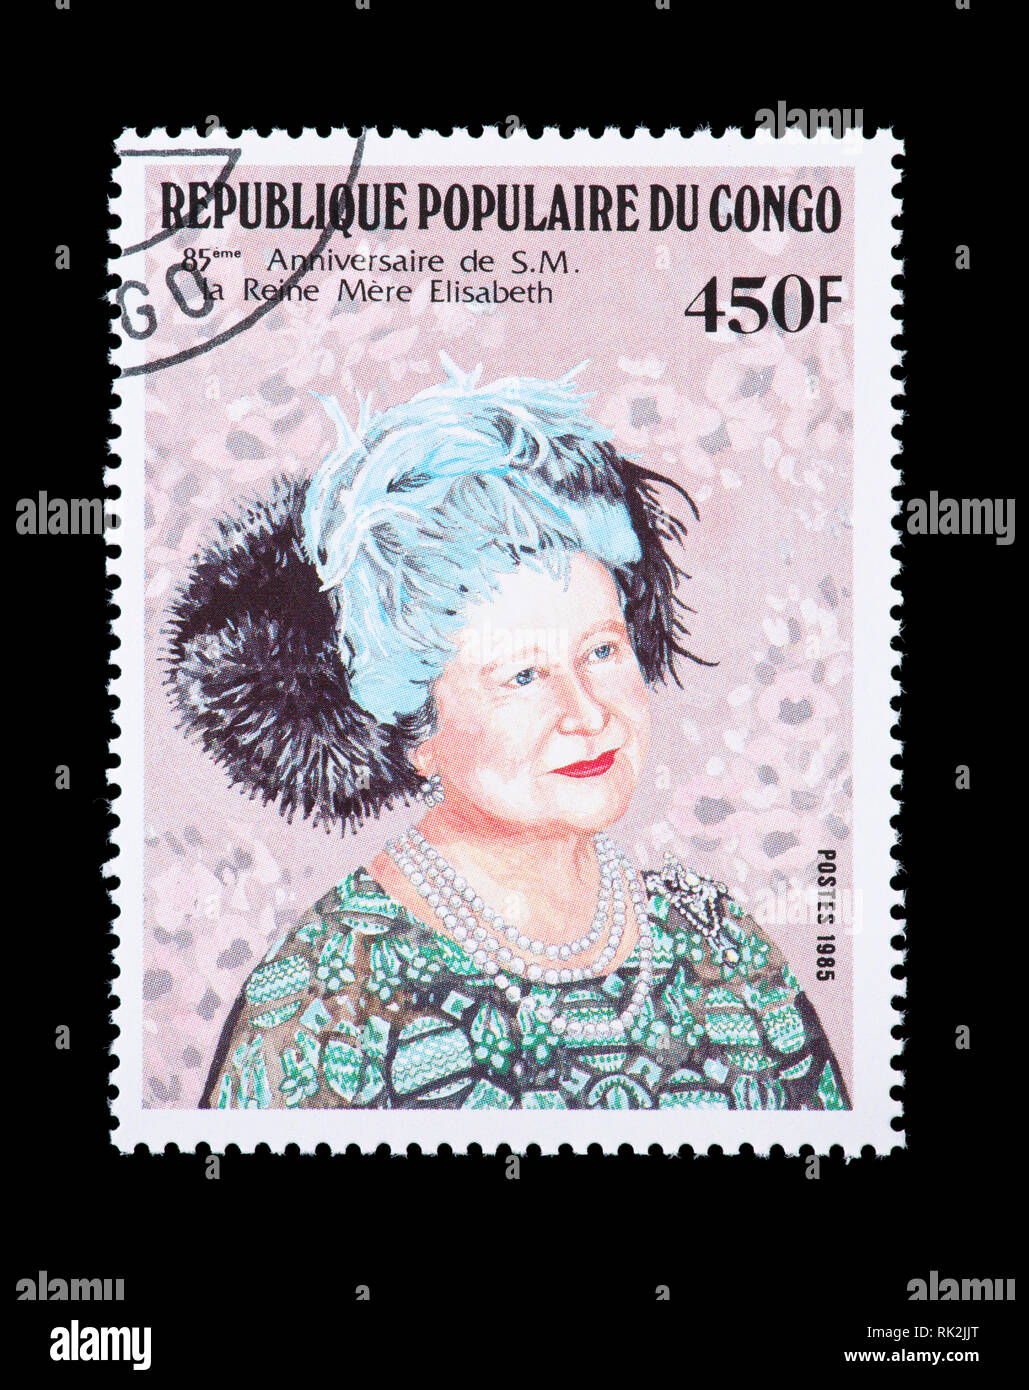 Postage stamp from COngo depicting the Queen MOther for her 85th birthday. Stock Photo